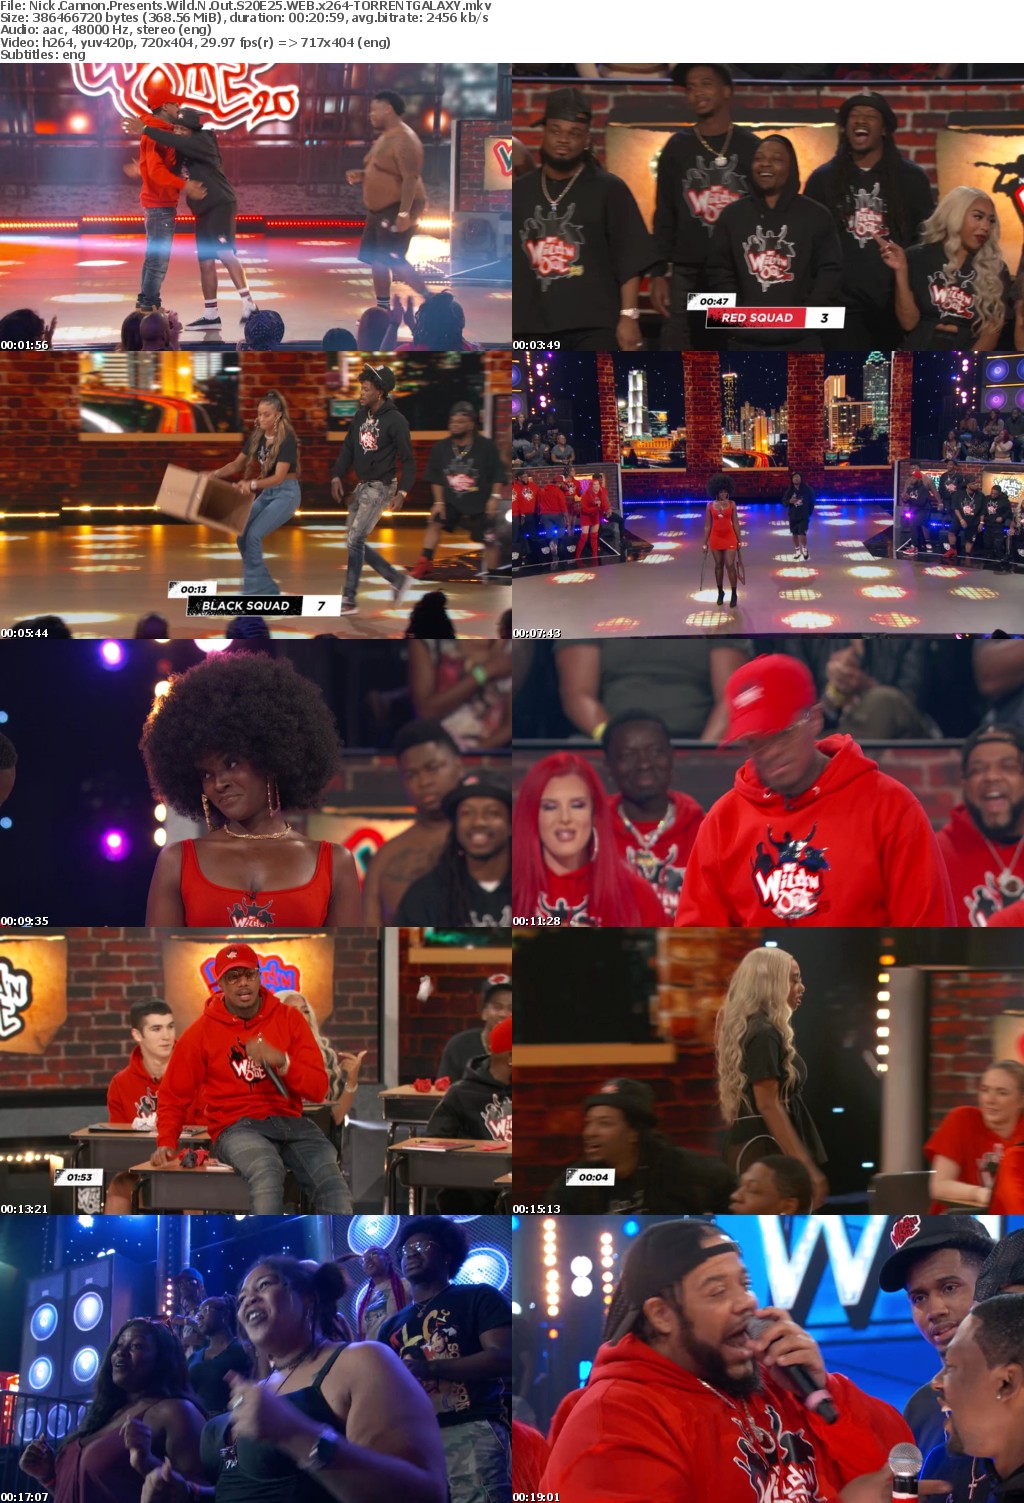 Nick Cannon Presents Wild N Out S20E25 WEB x264-GALAXY